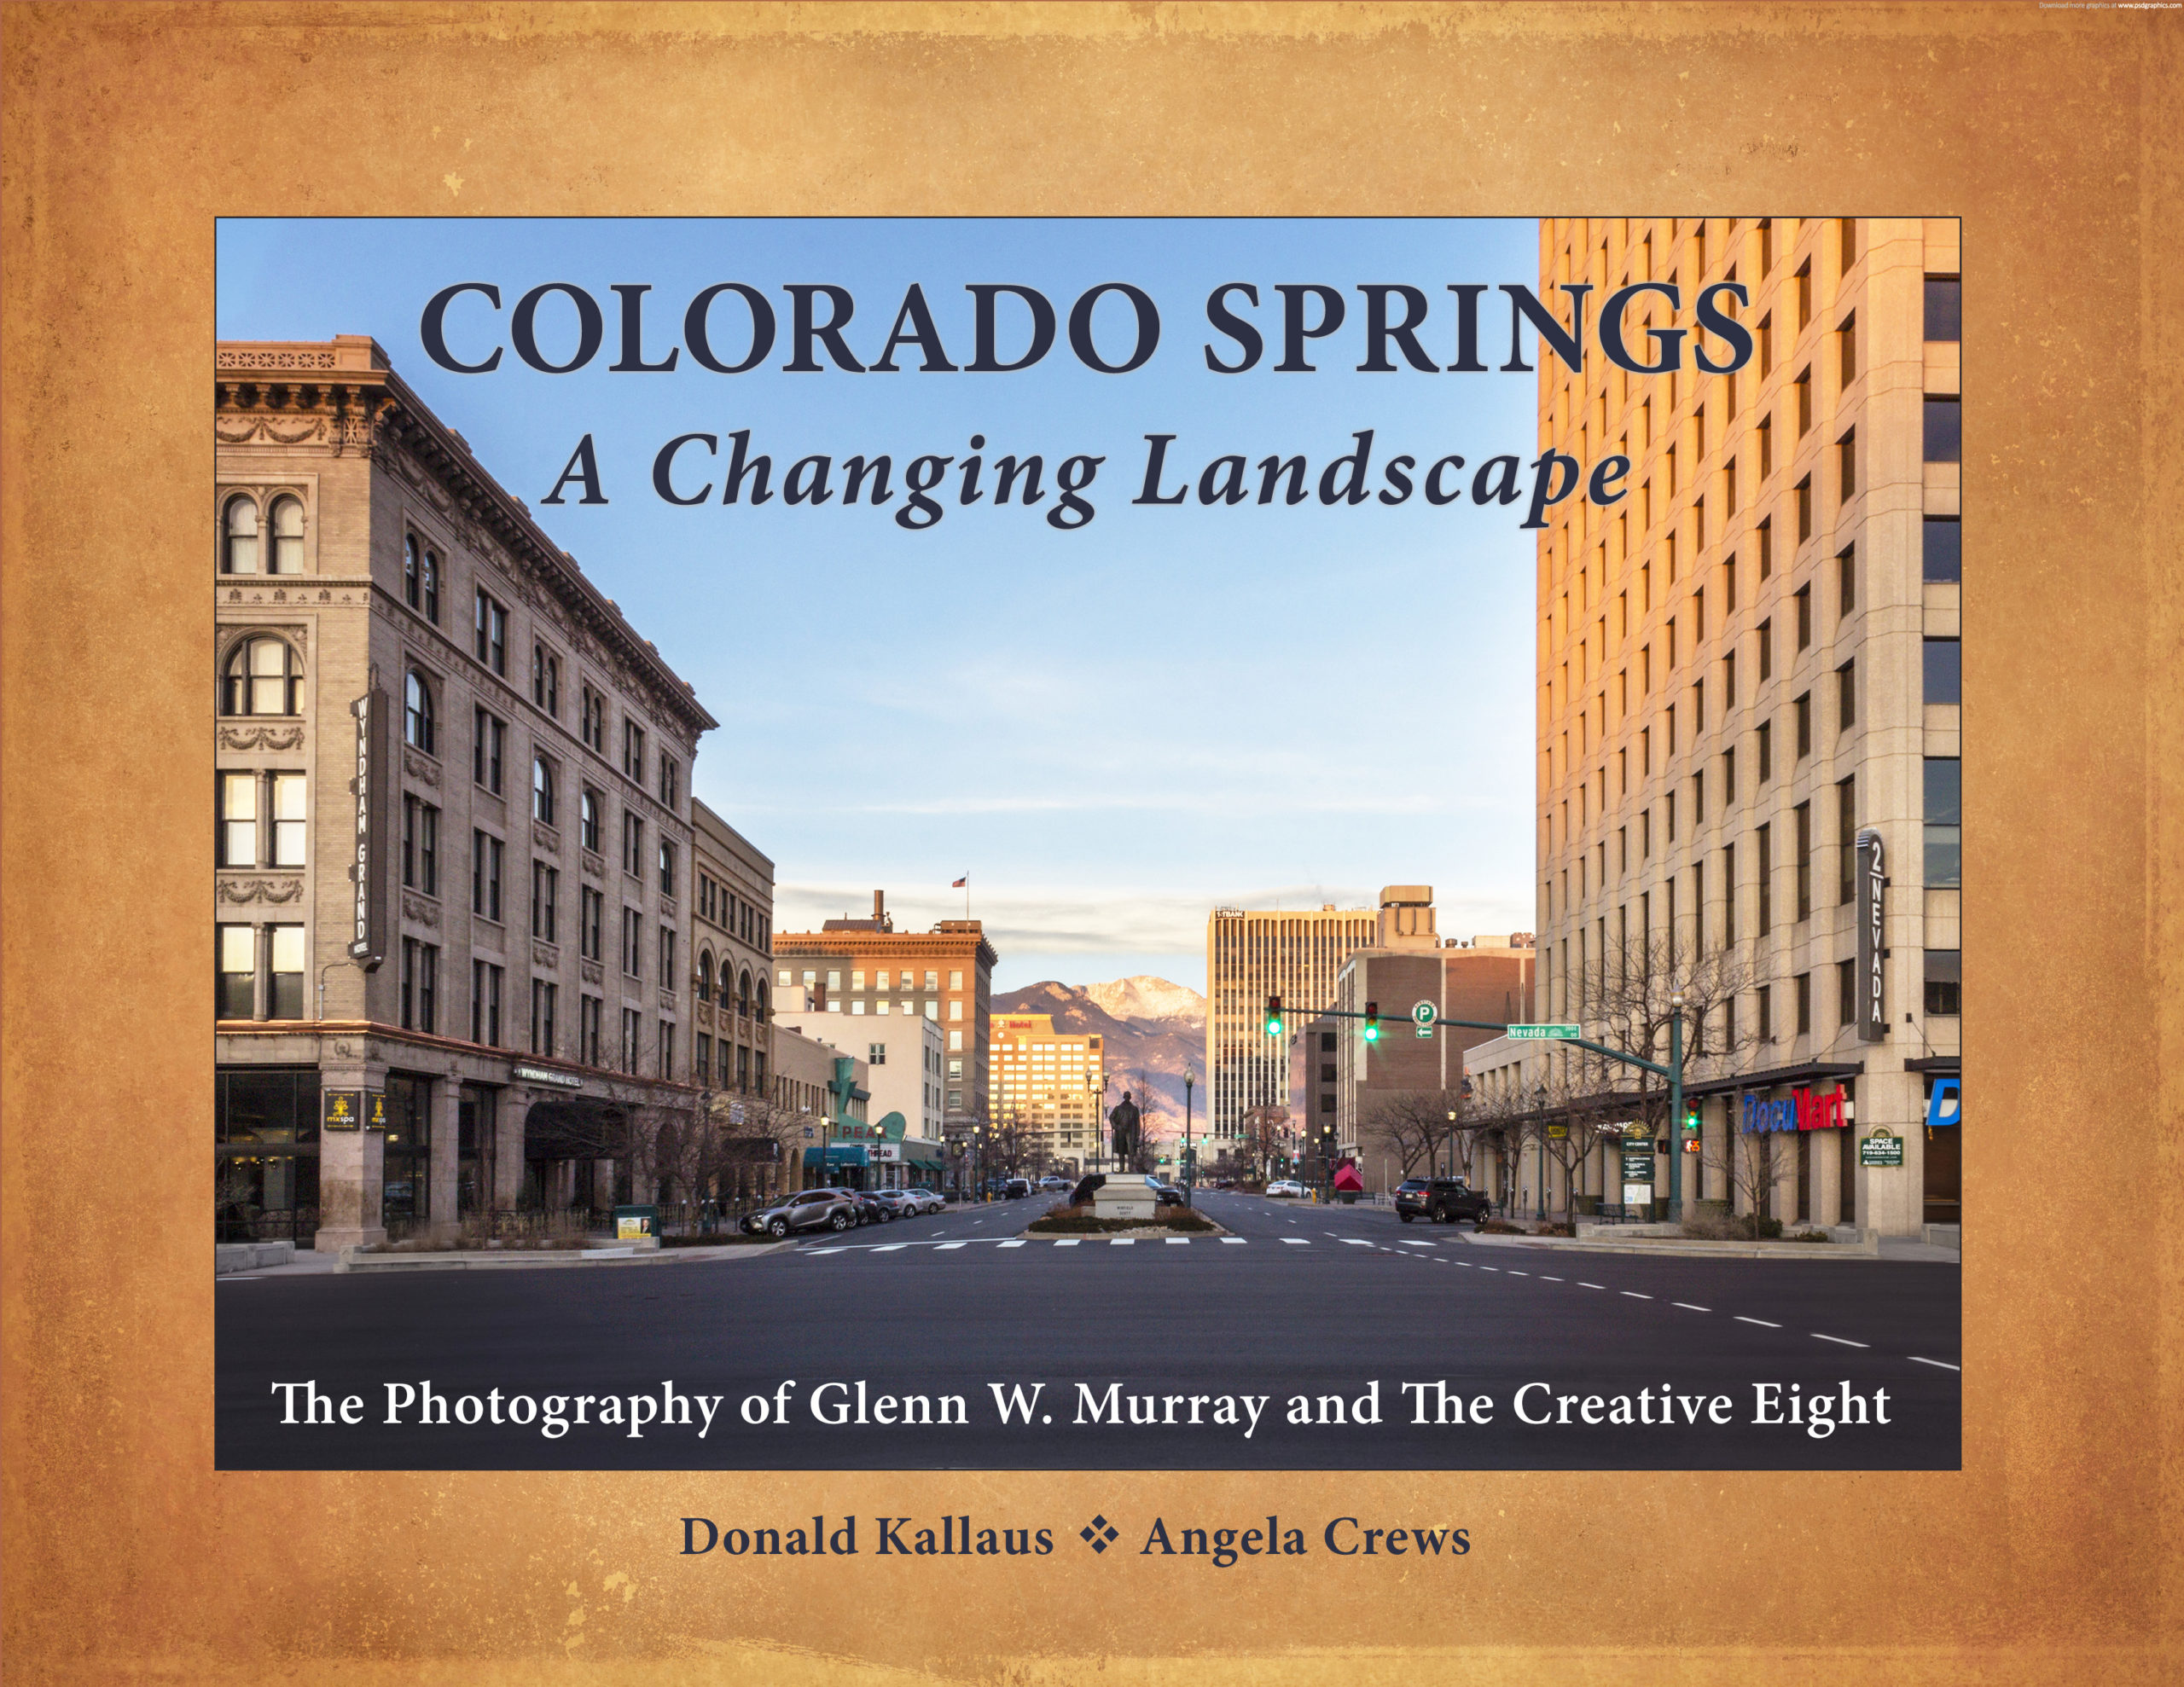 “COLORADO SPRINGS: A Changing Landscape” by Donald Kallaus